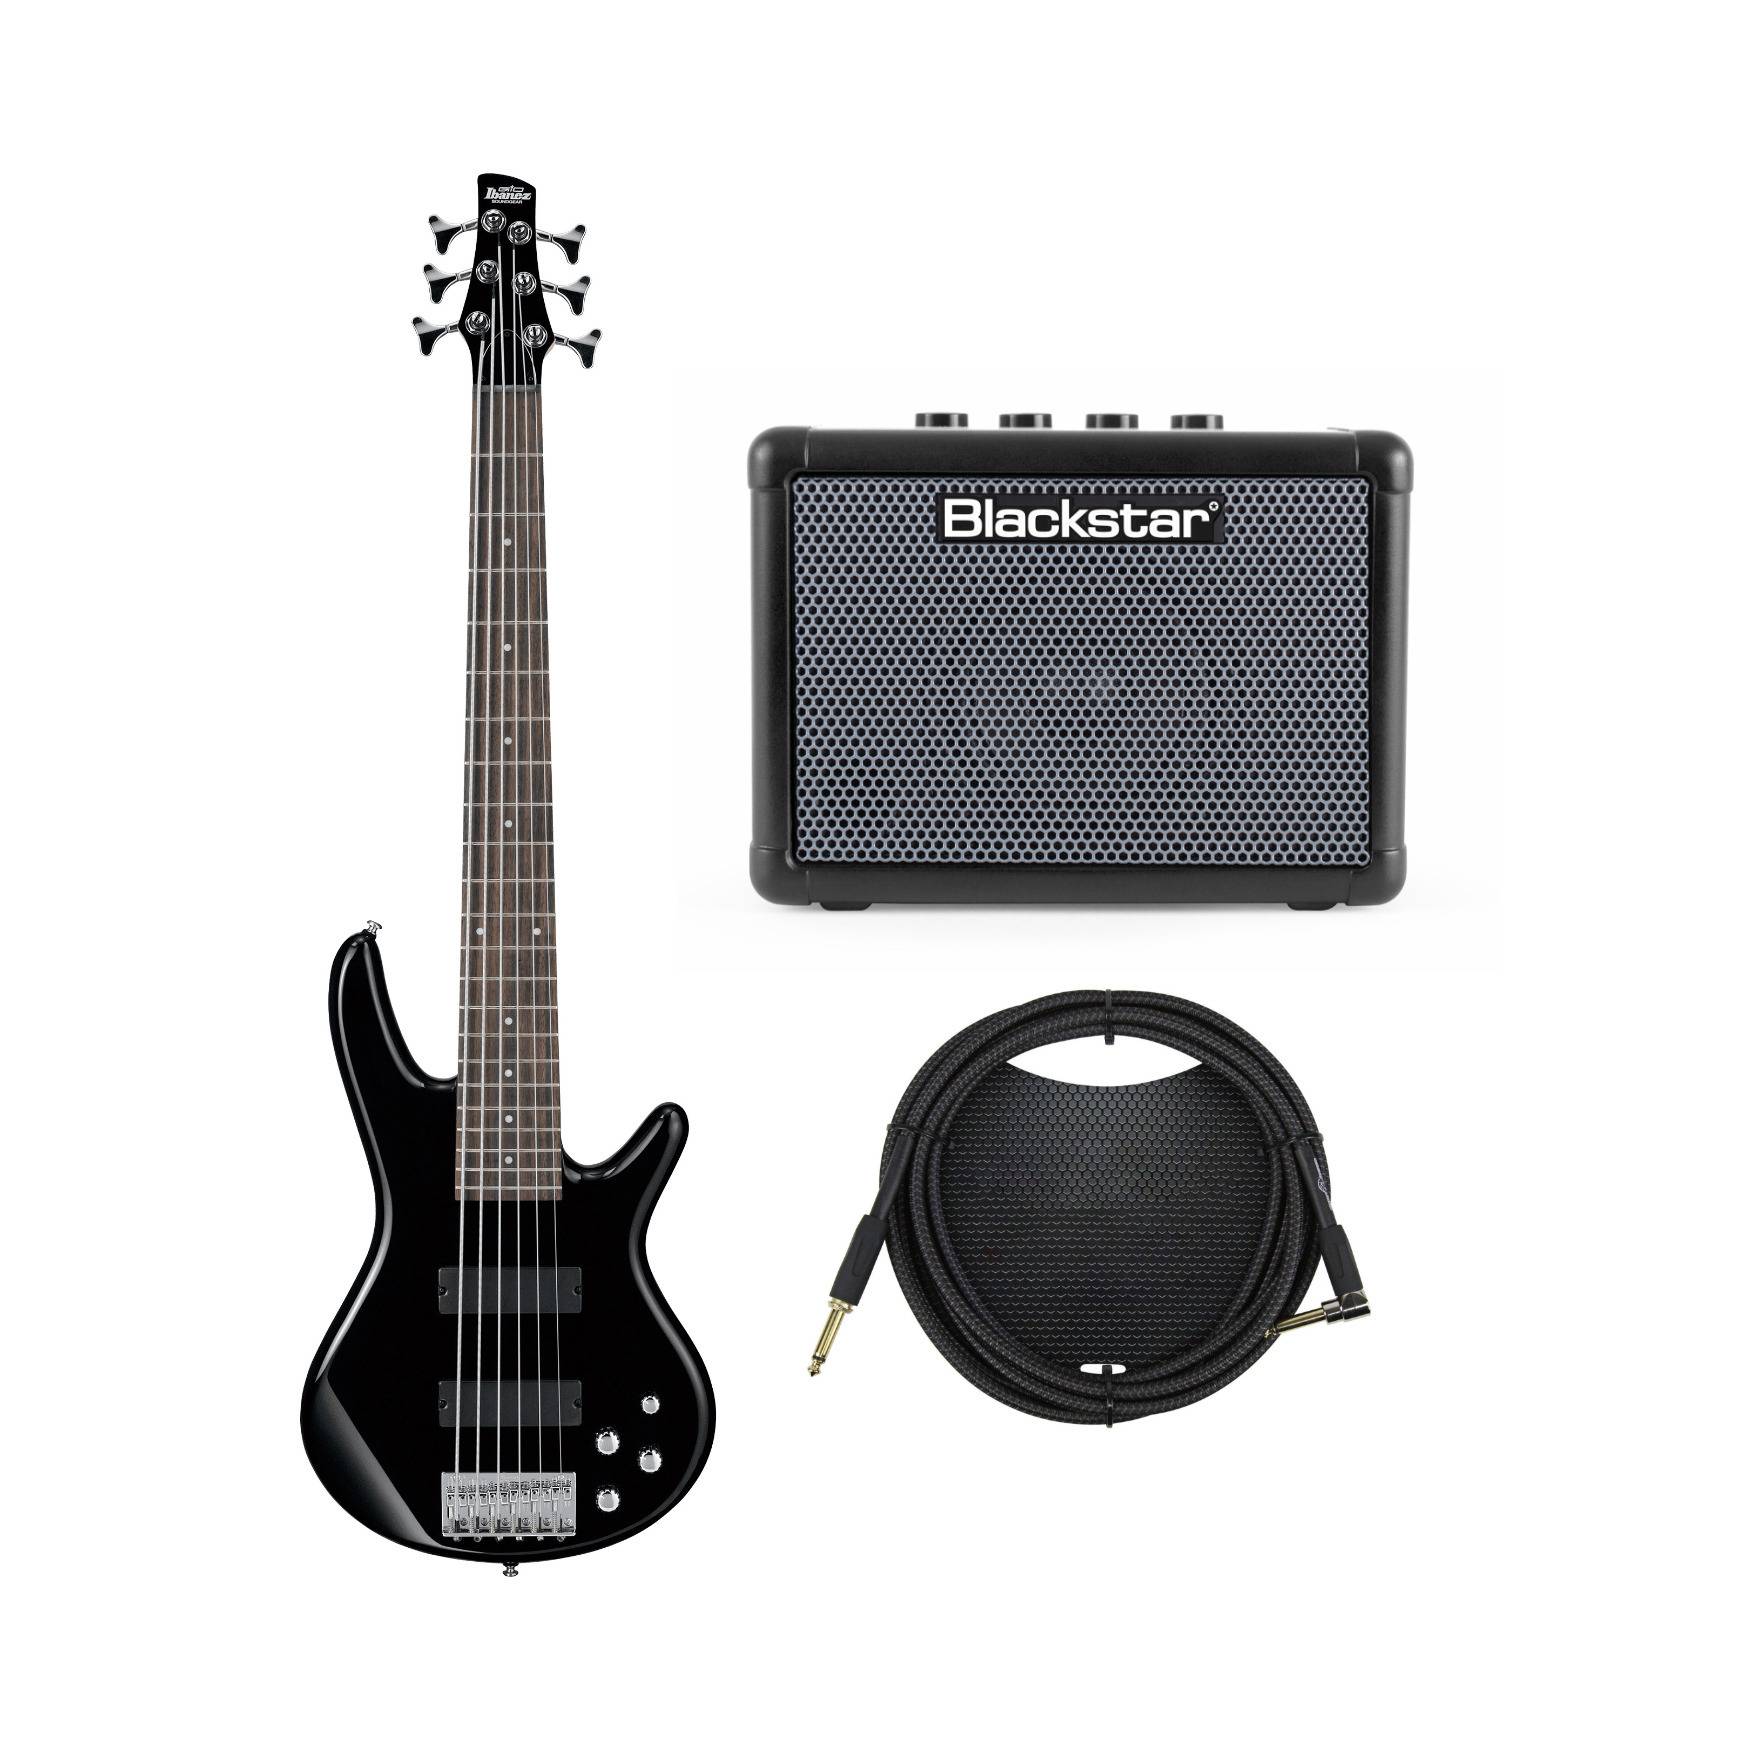 Ibanez GIO GSR206 6-String Electric Bass (Black) Bundle with Blackstar FLY3 Bass Amp and 10-Ft Cable